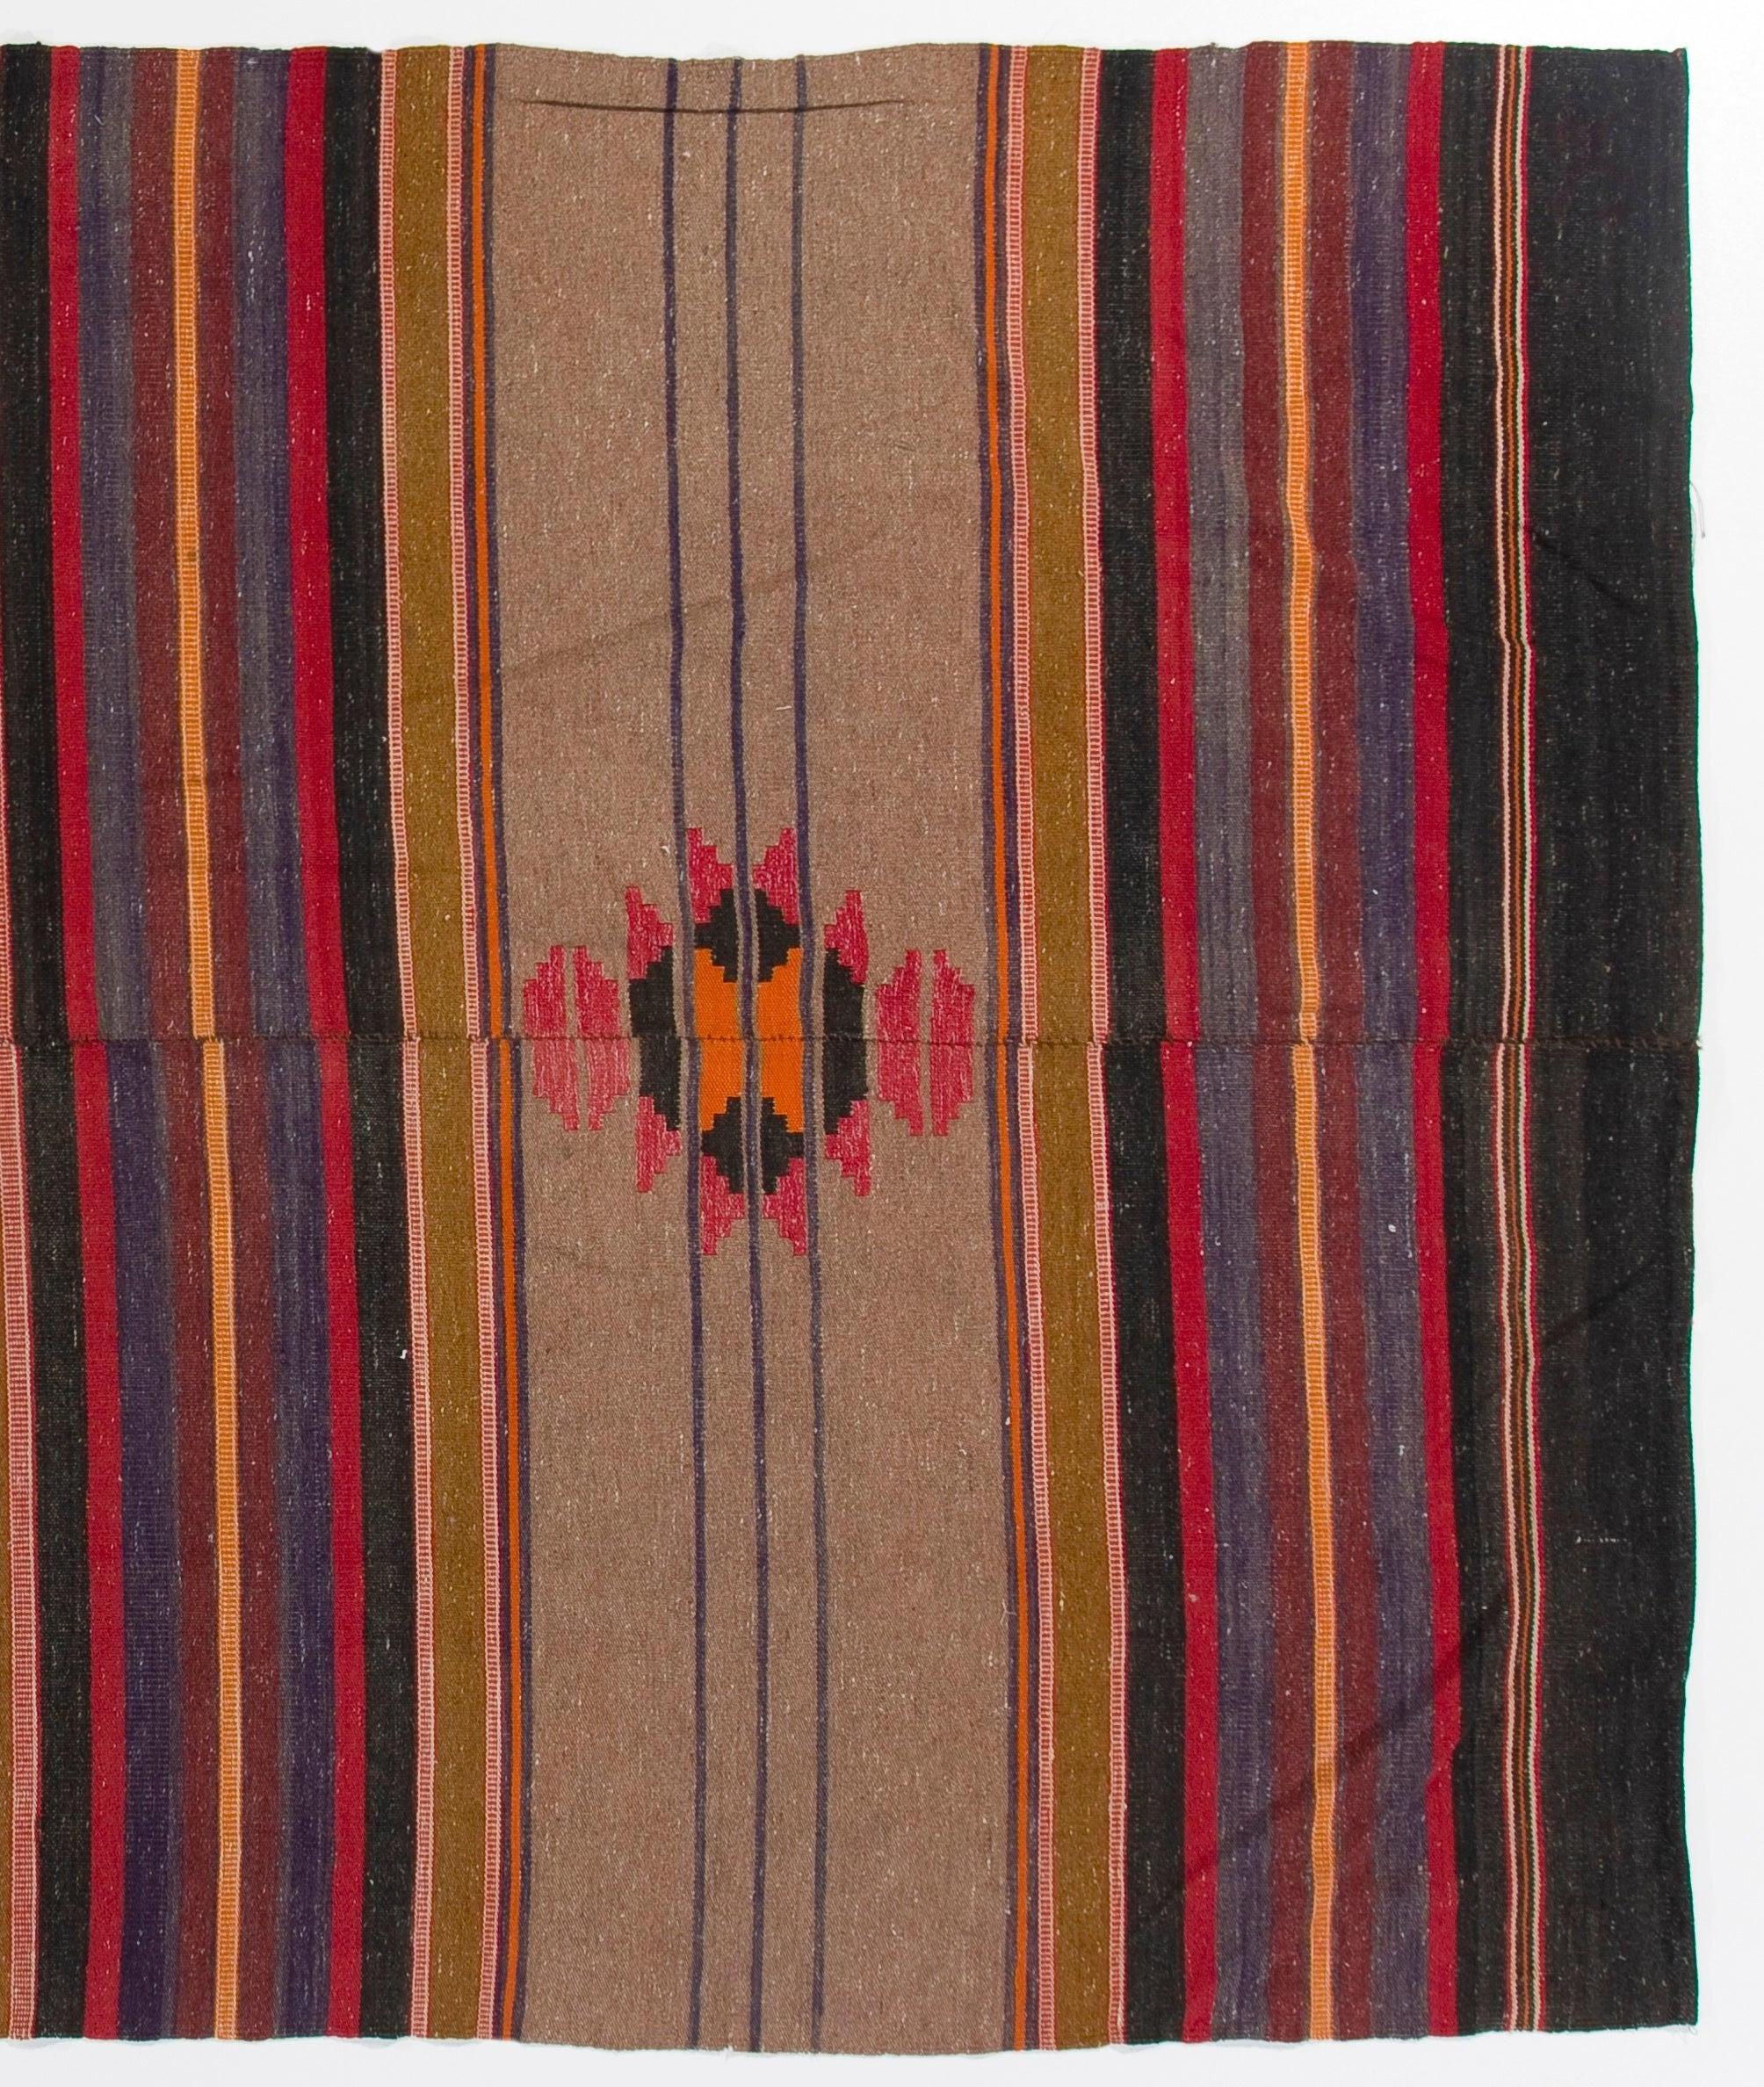 20th Century 4.4x9.3 Ft Vintage Hand-Woven Nomadic Turkish Kilim, Wool Flat-Weave Rug For Sale